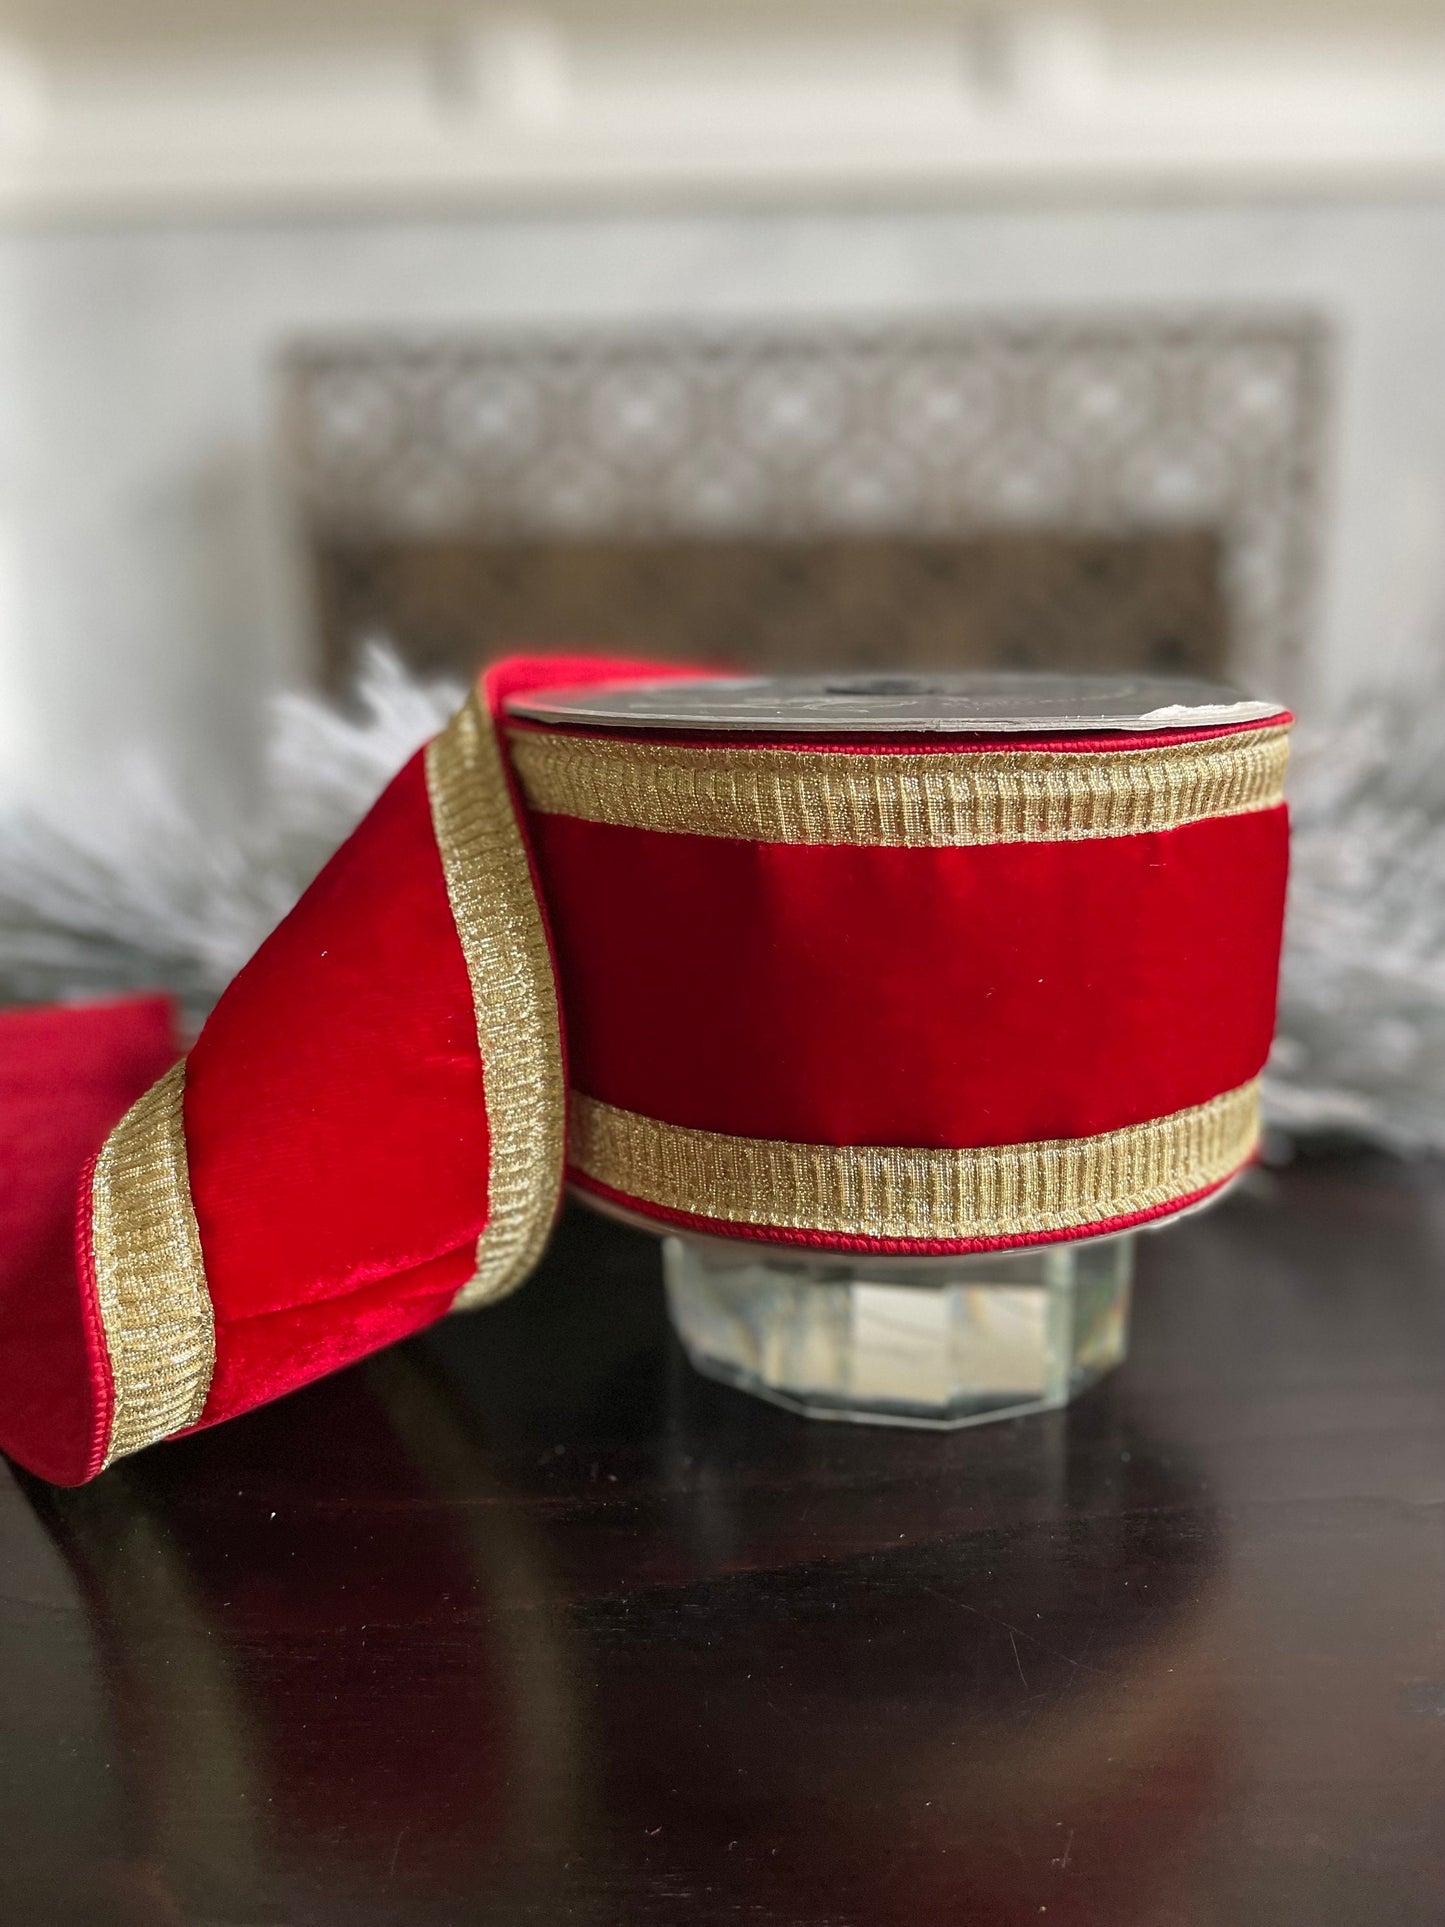 4” x 10 yds Designer pleated borders ribbon, red velvet ribbon with gold borders. Wired. Farrisilk.